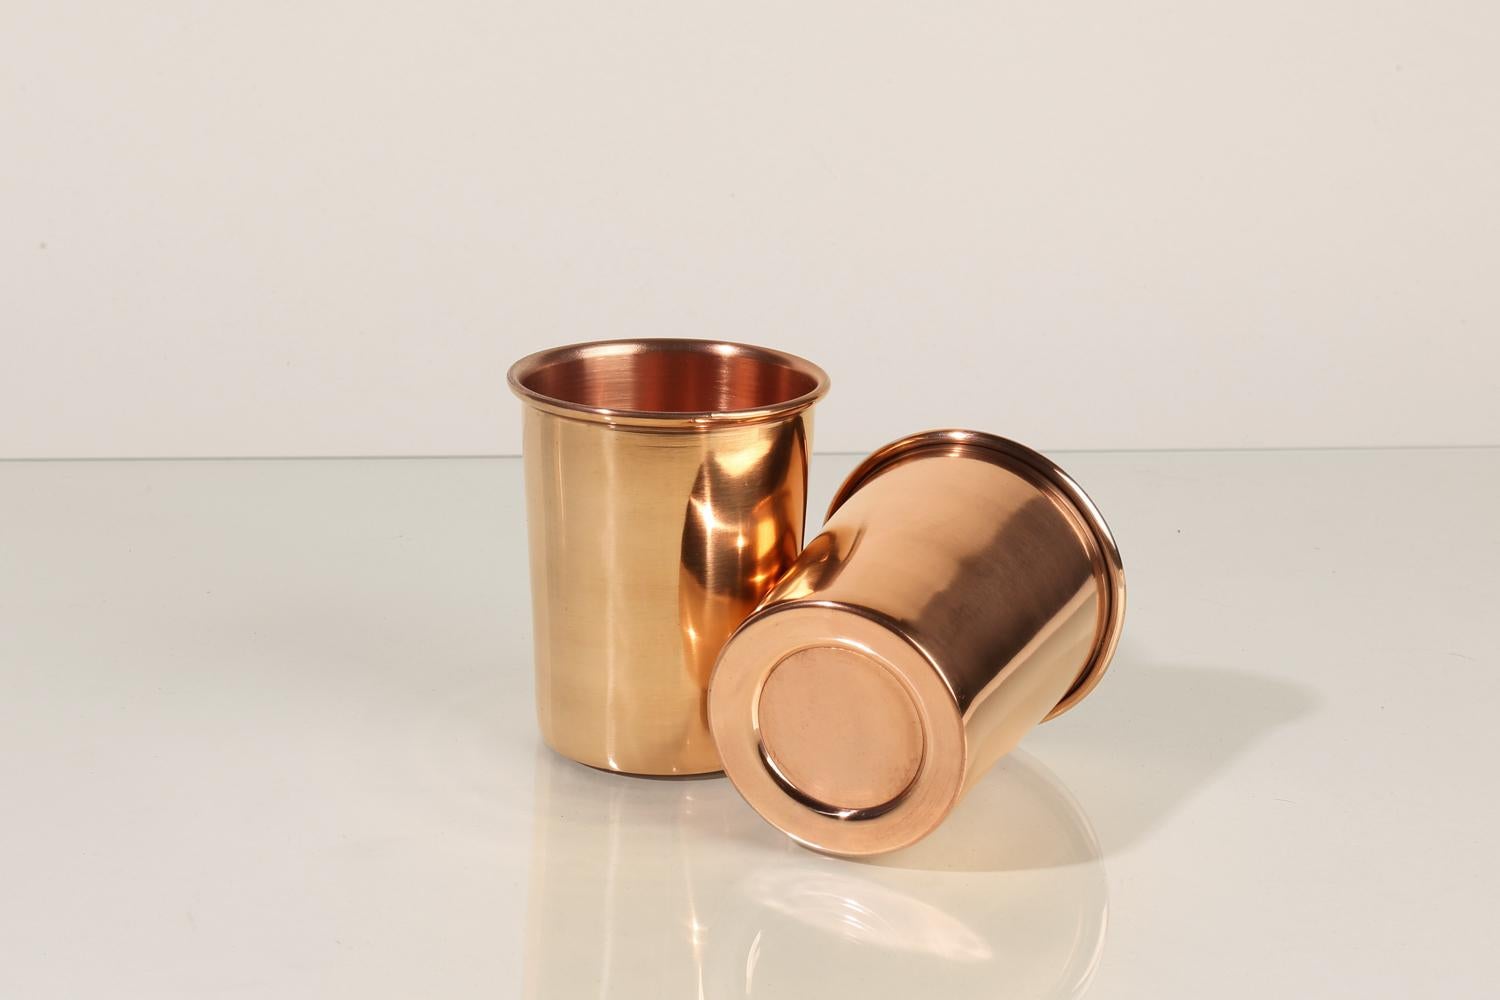 These pure copper cups are functional and versatile. Copper has qualities that make for an excellent drinking cup: the material is naturally insulated and antimicrobial. Great for use in the home or outdoors.

This cup will develop a beautiful